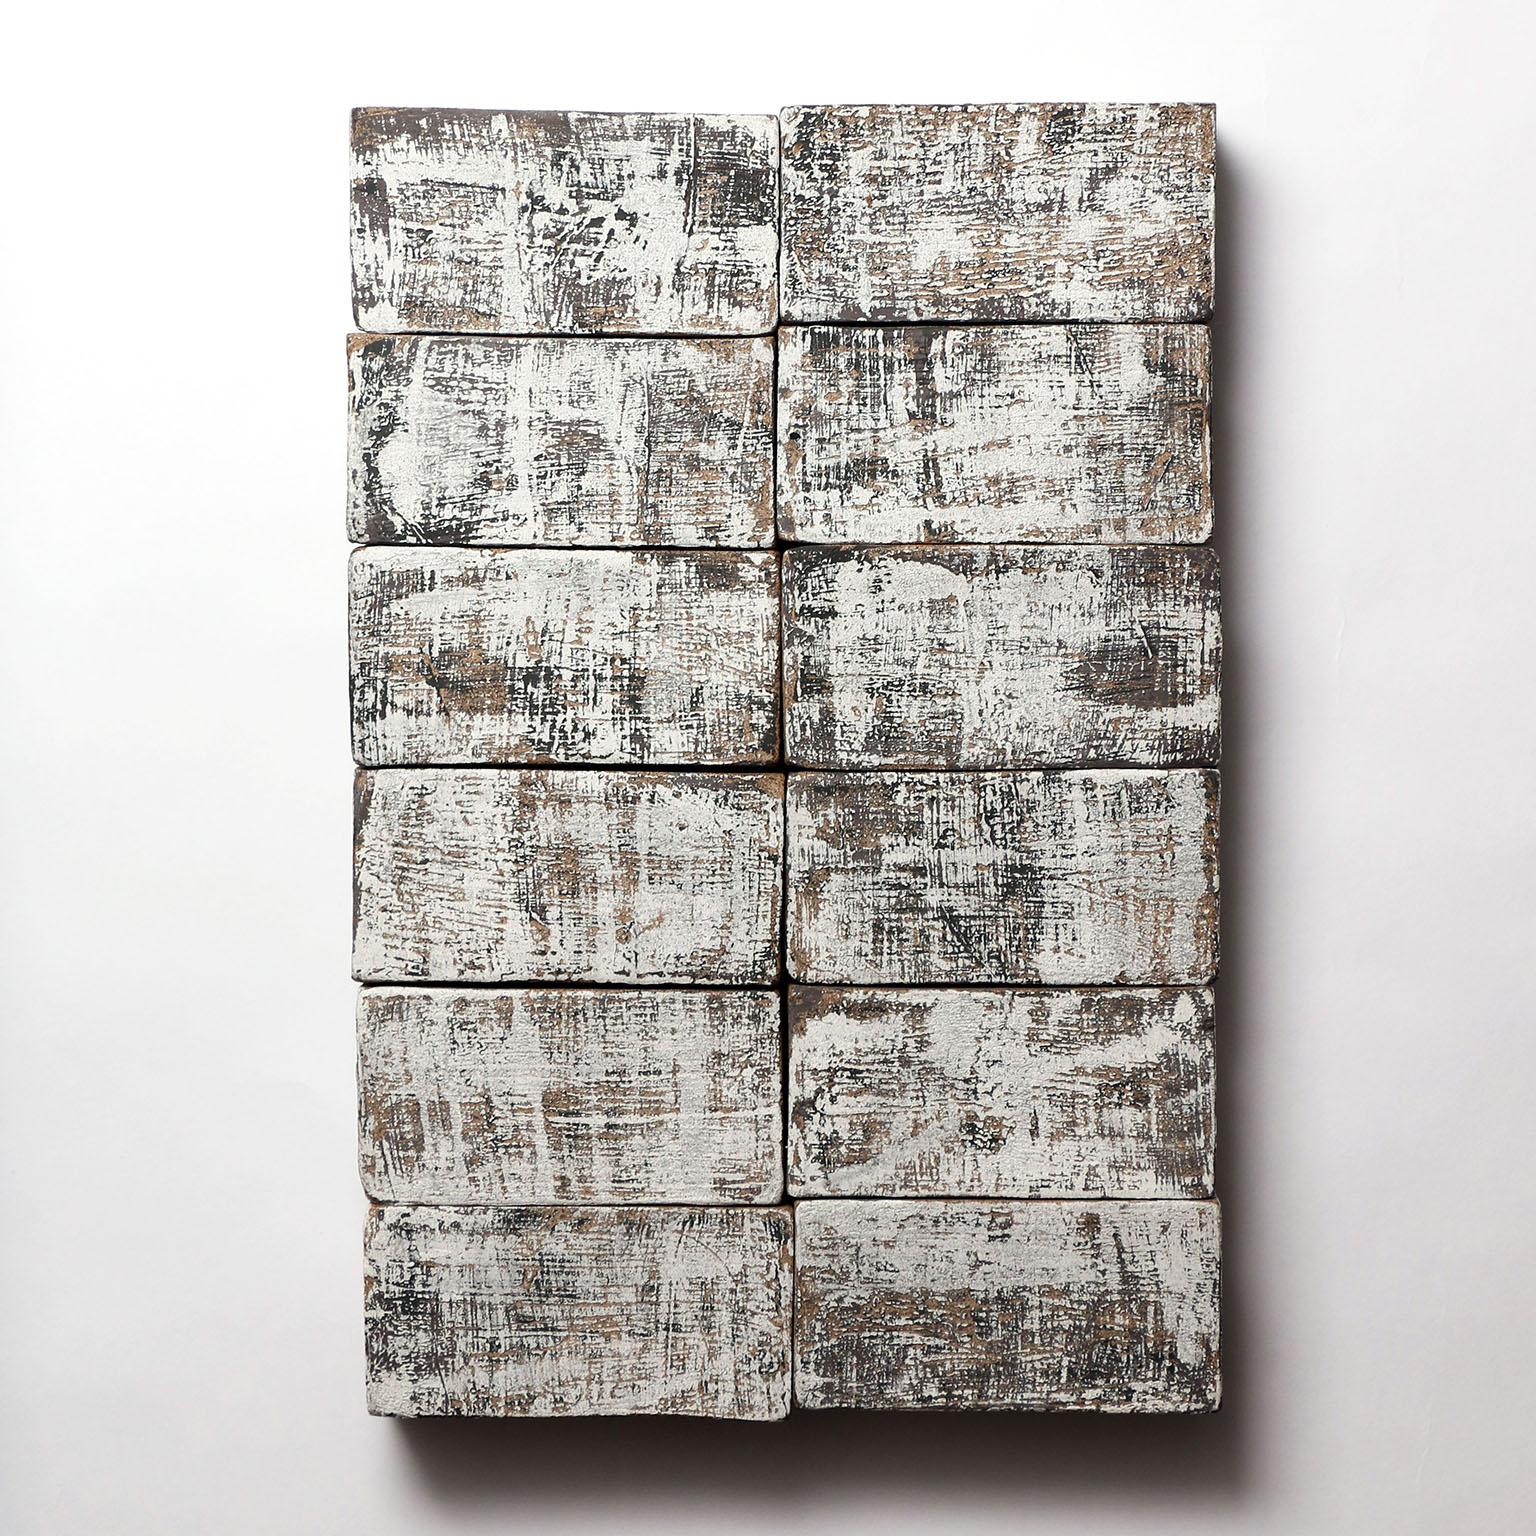 Based on the I Ching, an ancient Chinese divination text, this one-of-kind ceramic wall sculpture is composed of handmade stoneware blocks. Each block has a complex layered black and white finish, with a texture reminiscent of wood or stone, and is